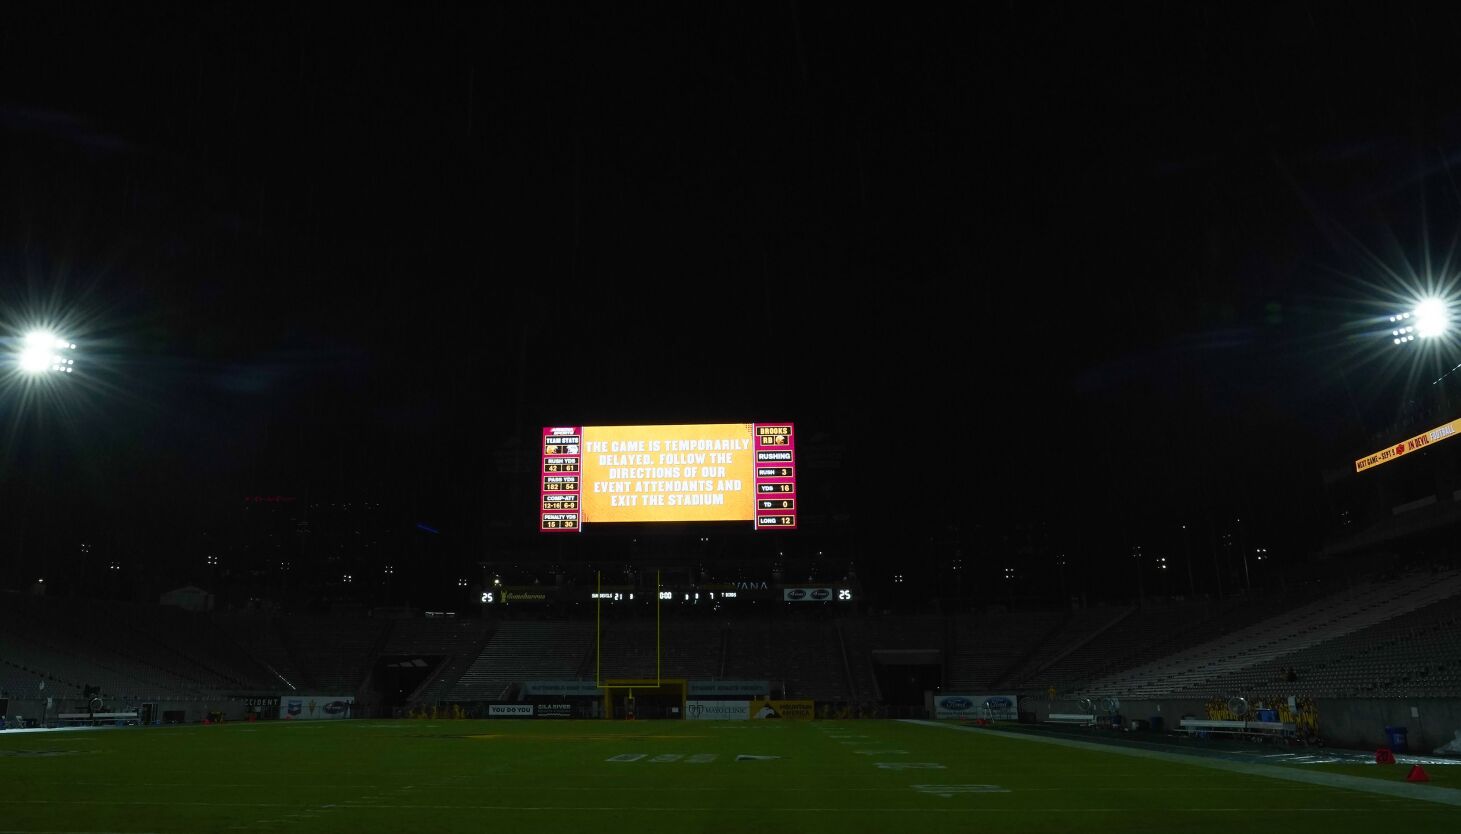  Pac-12 After Dark went to another level after a nearly 3-hour weather delay 